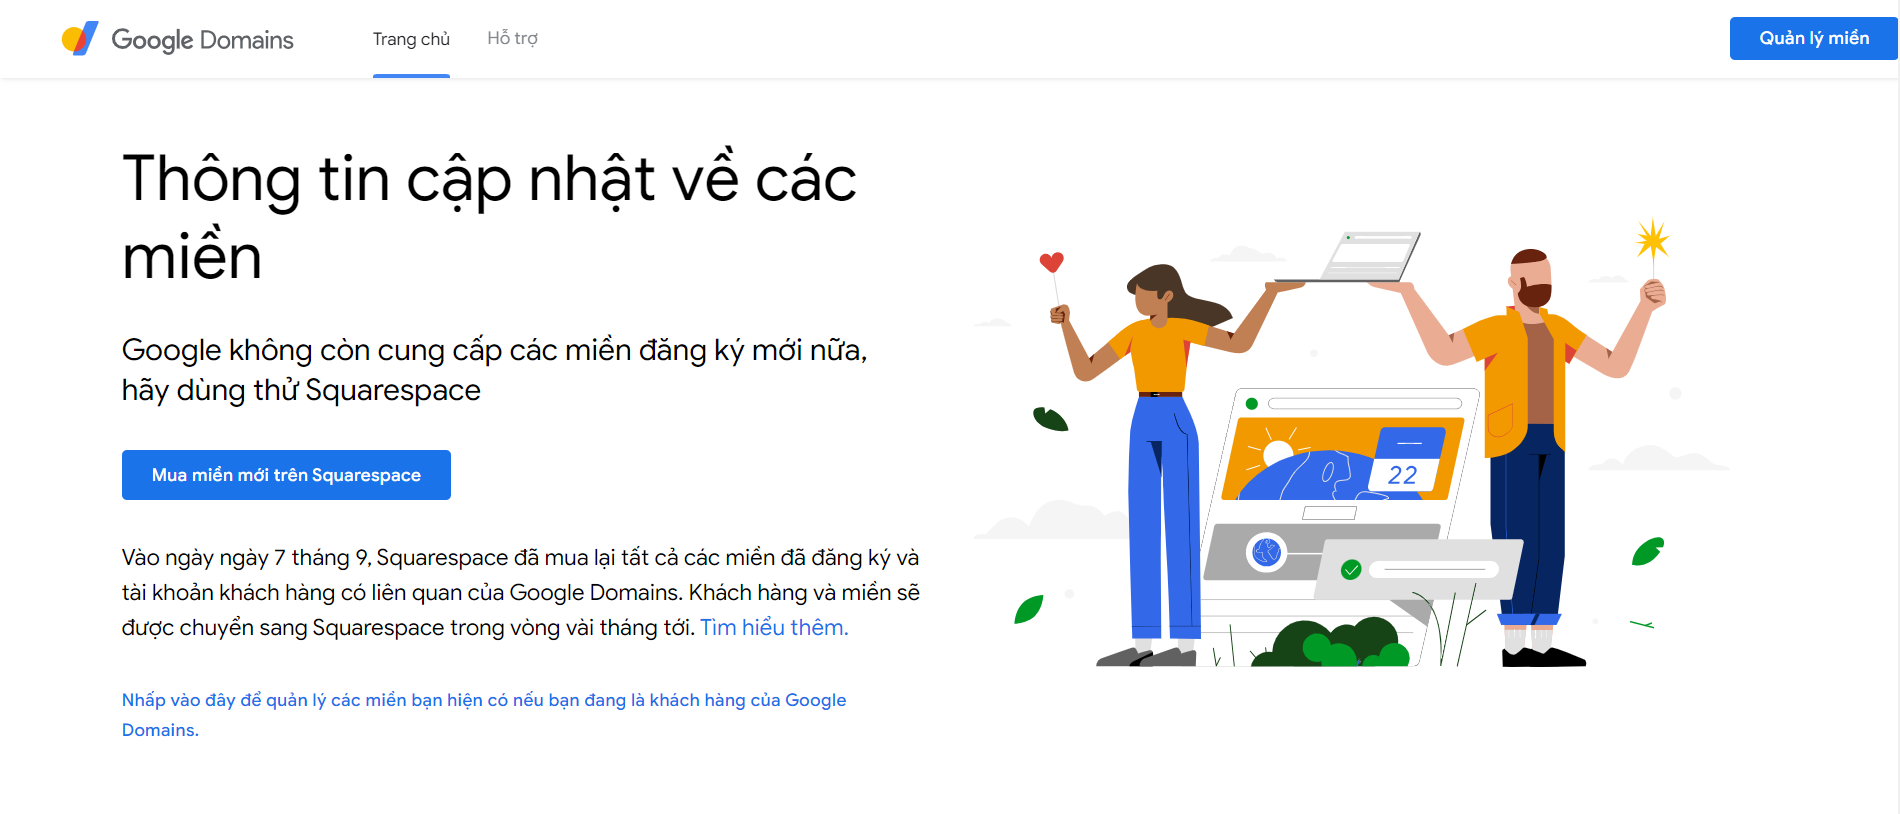 Giao diện Google Domains